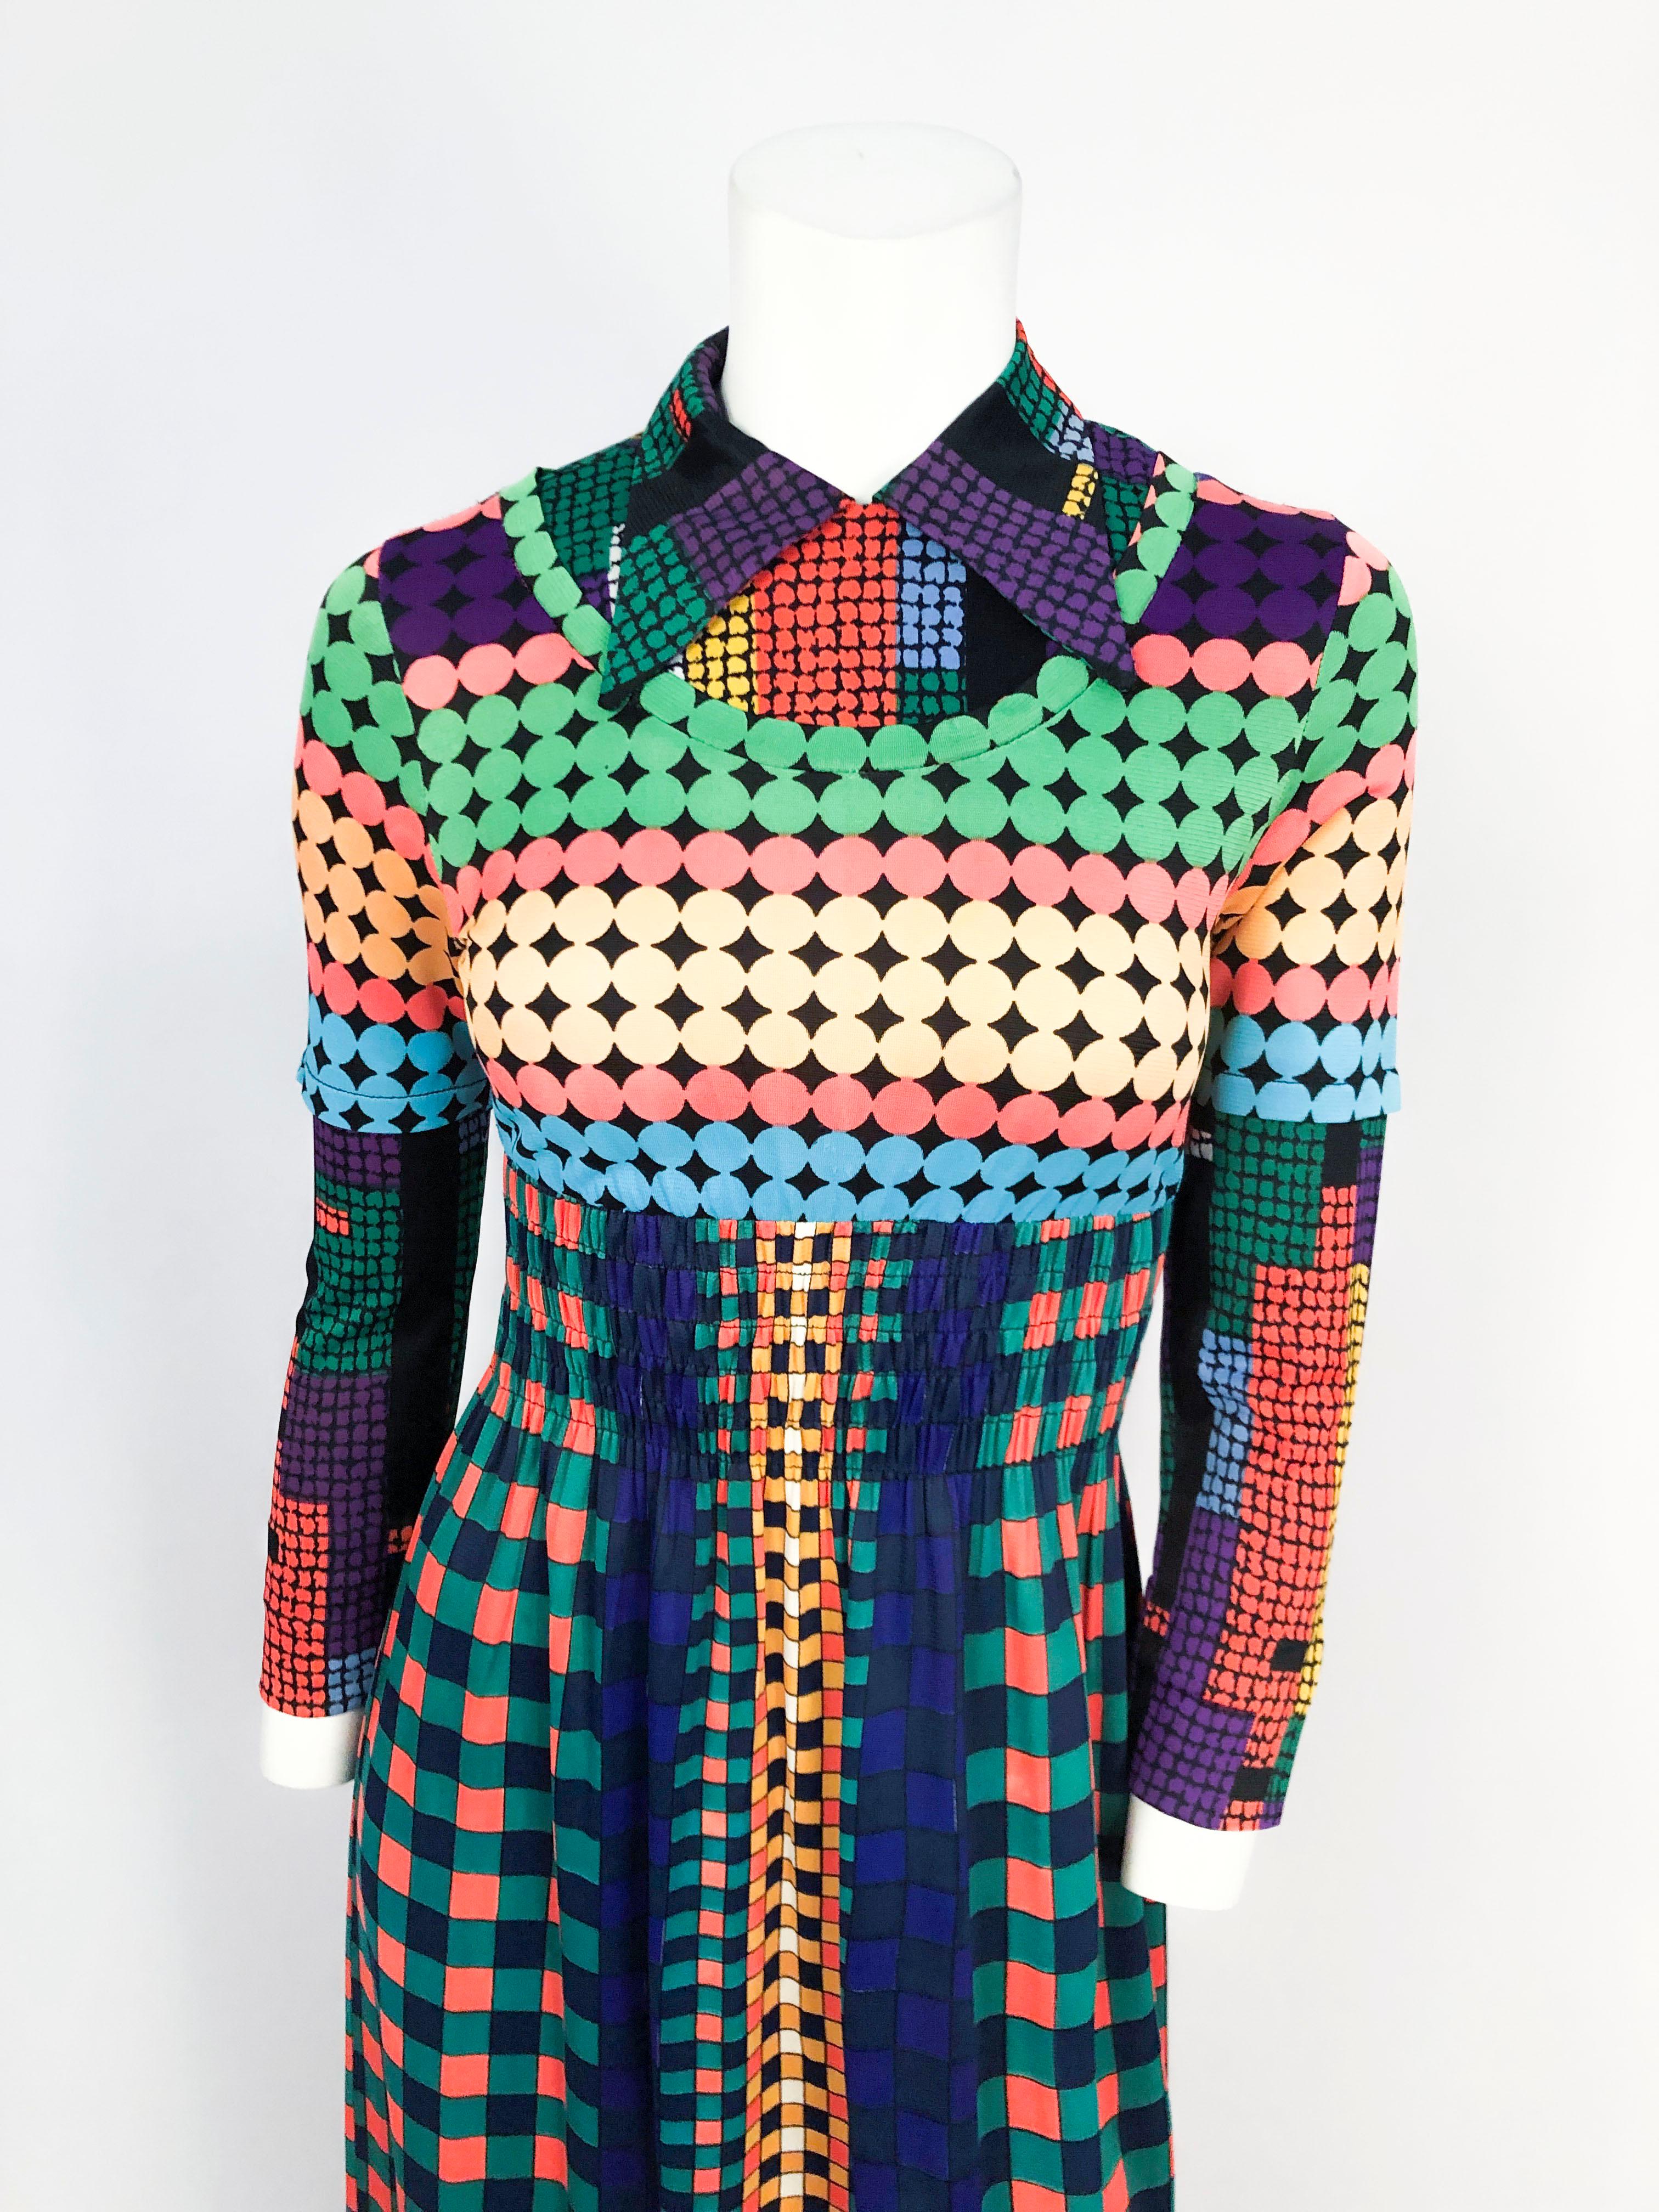 1970s Vibrant Geometric Printed Dress (in green, lime, violet, orange, etc.) featuring an oversized collar, smocked waist, overlaying detail on the arms and the neckline.